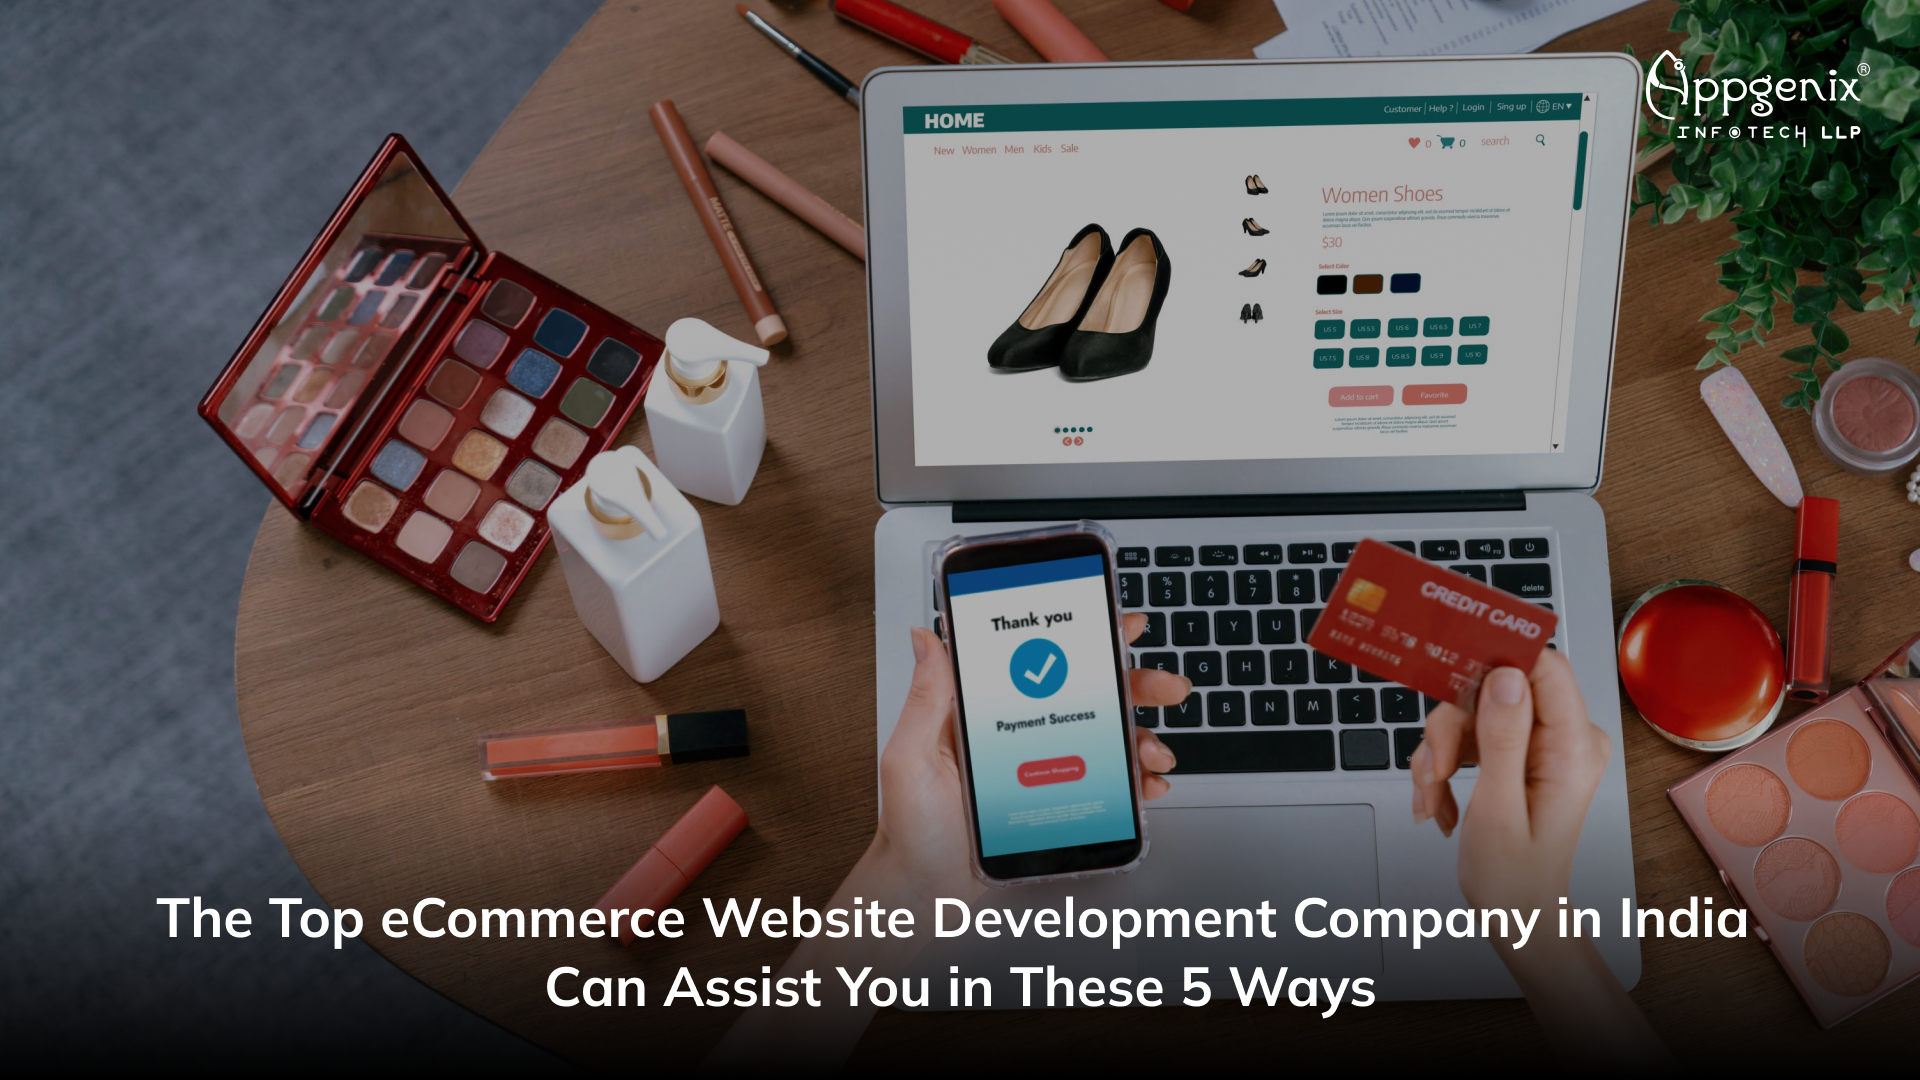 The Top eCommerce Website Development Company in India Can Assist You in These 5 Ways